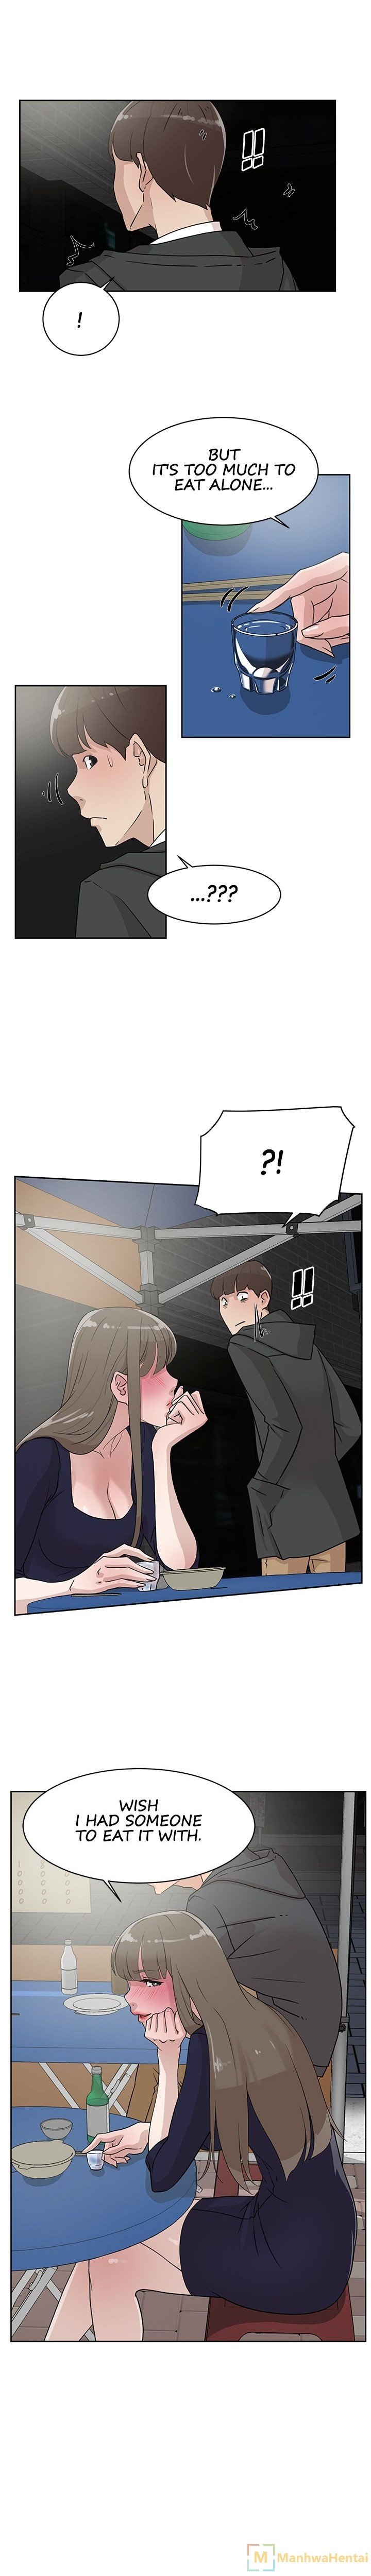 office-affairs-chap-30-11